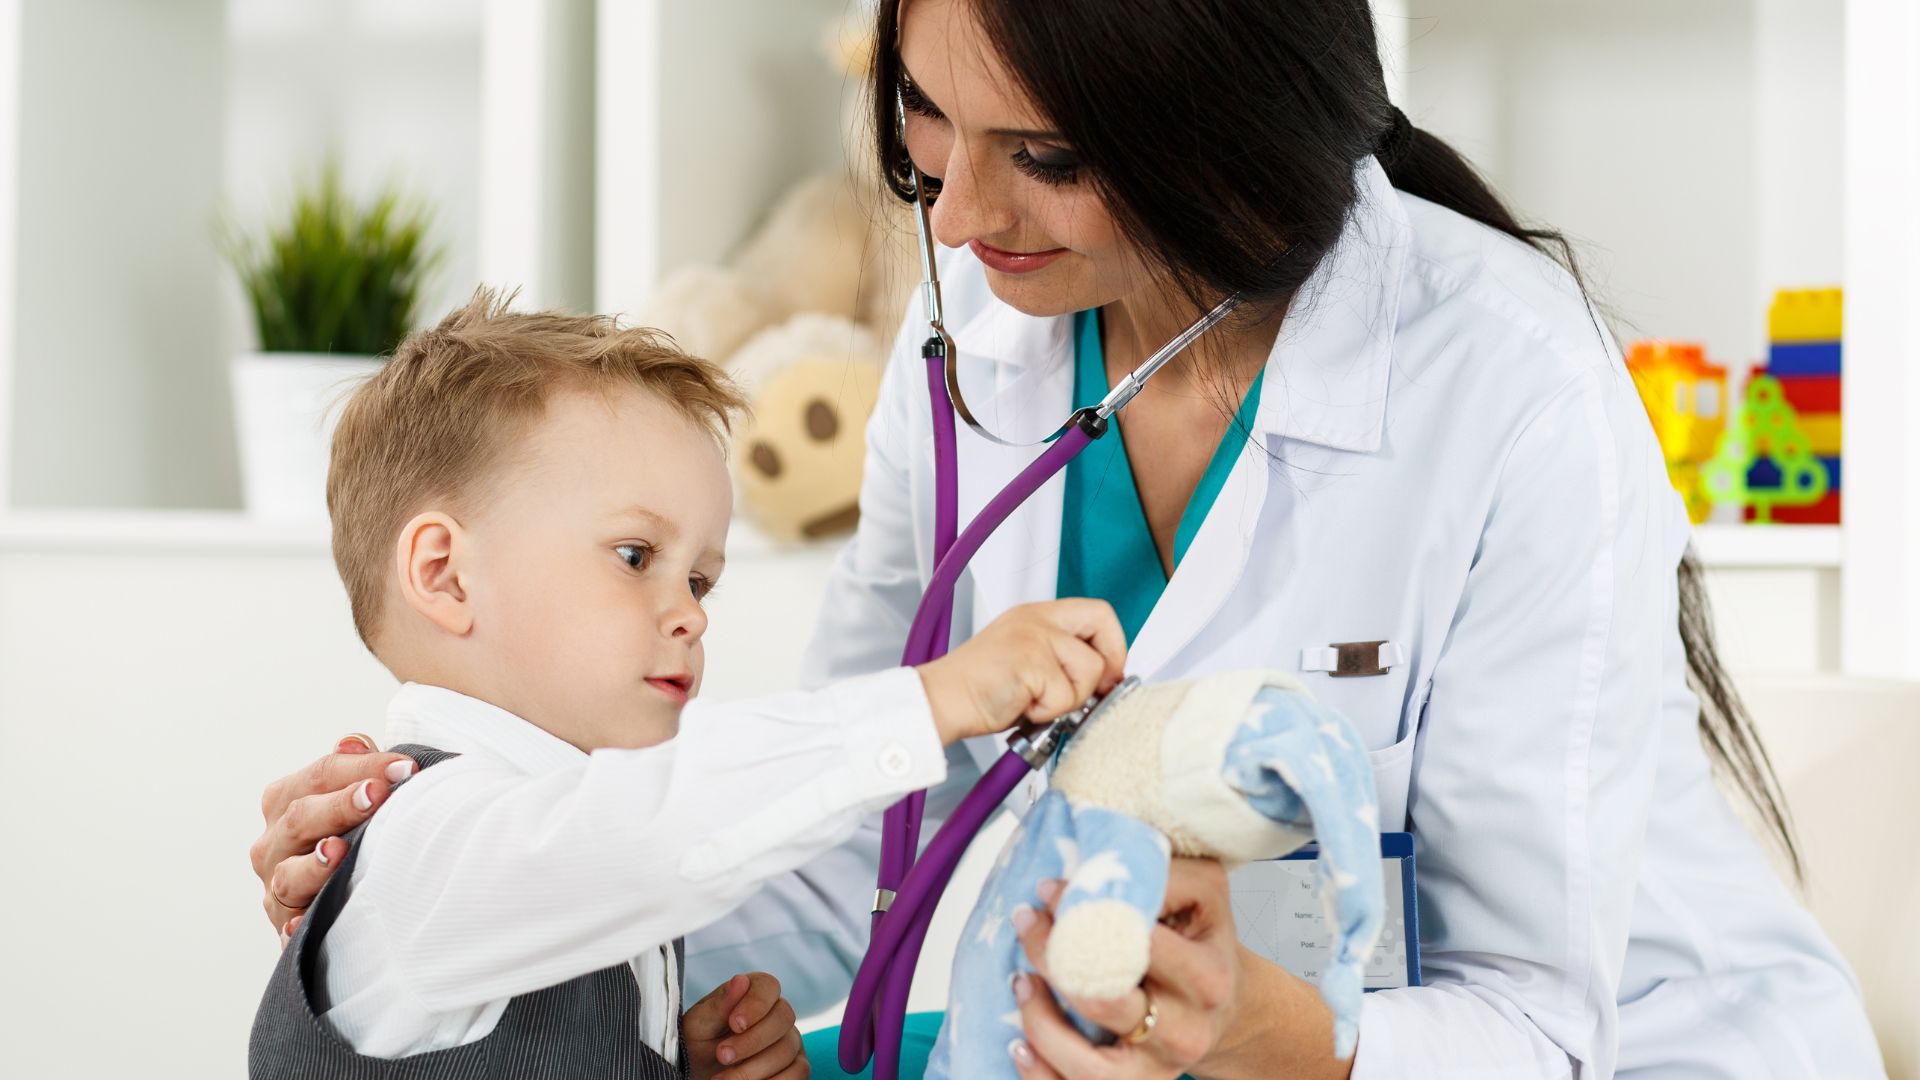 A Word About Child Medical Insurance